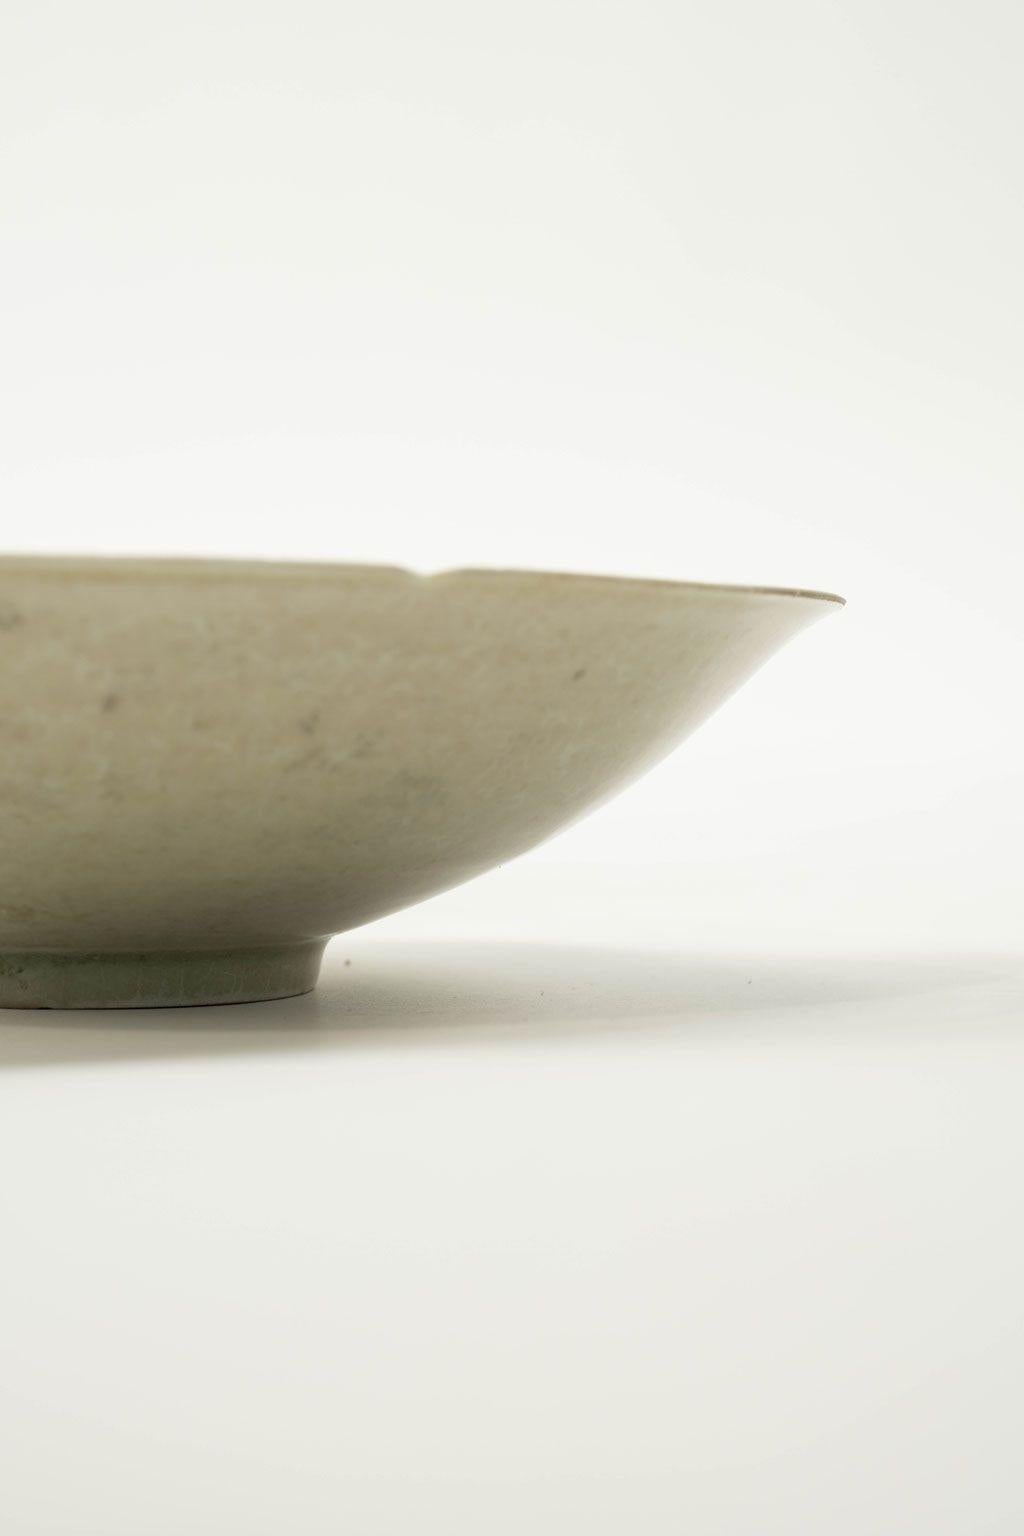 Chinese Qingbai Lobed Foliate-Rim Bowl, Song Dynasty For Sale 8